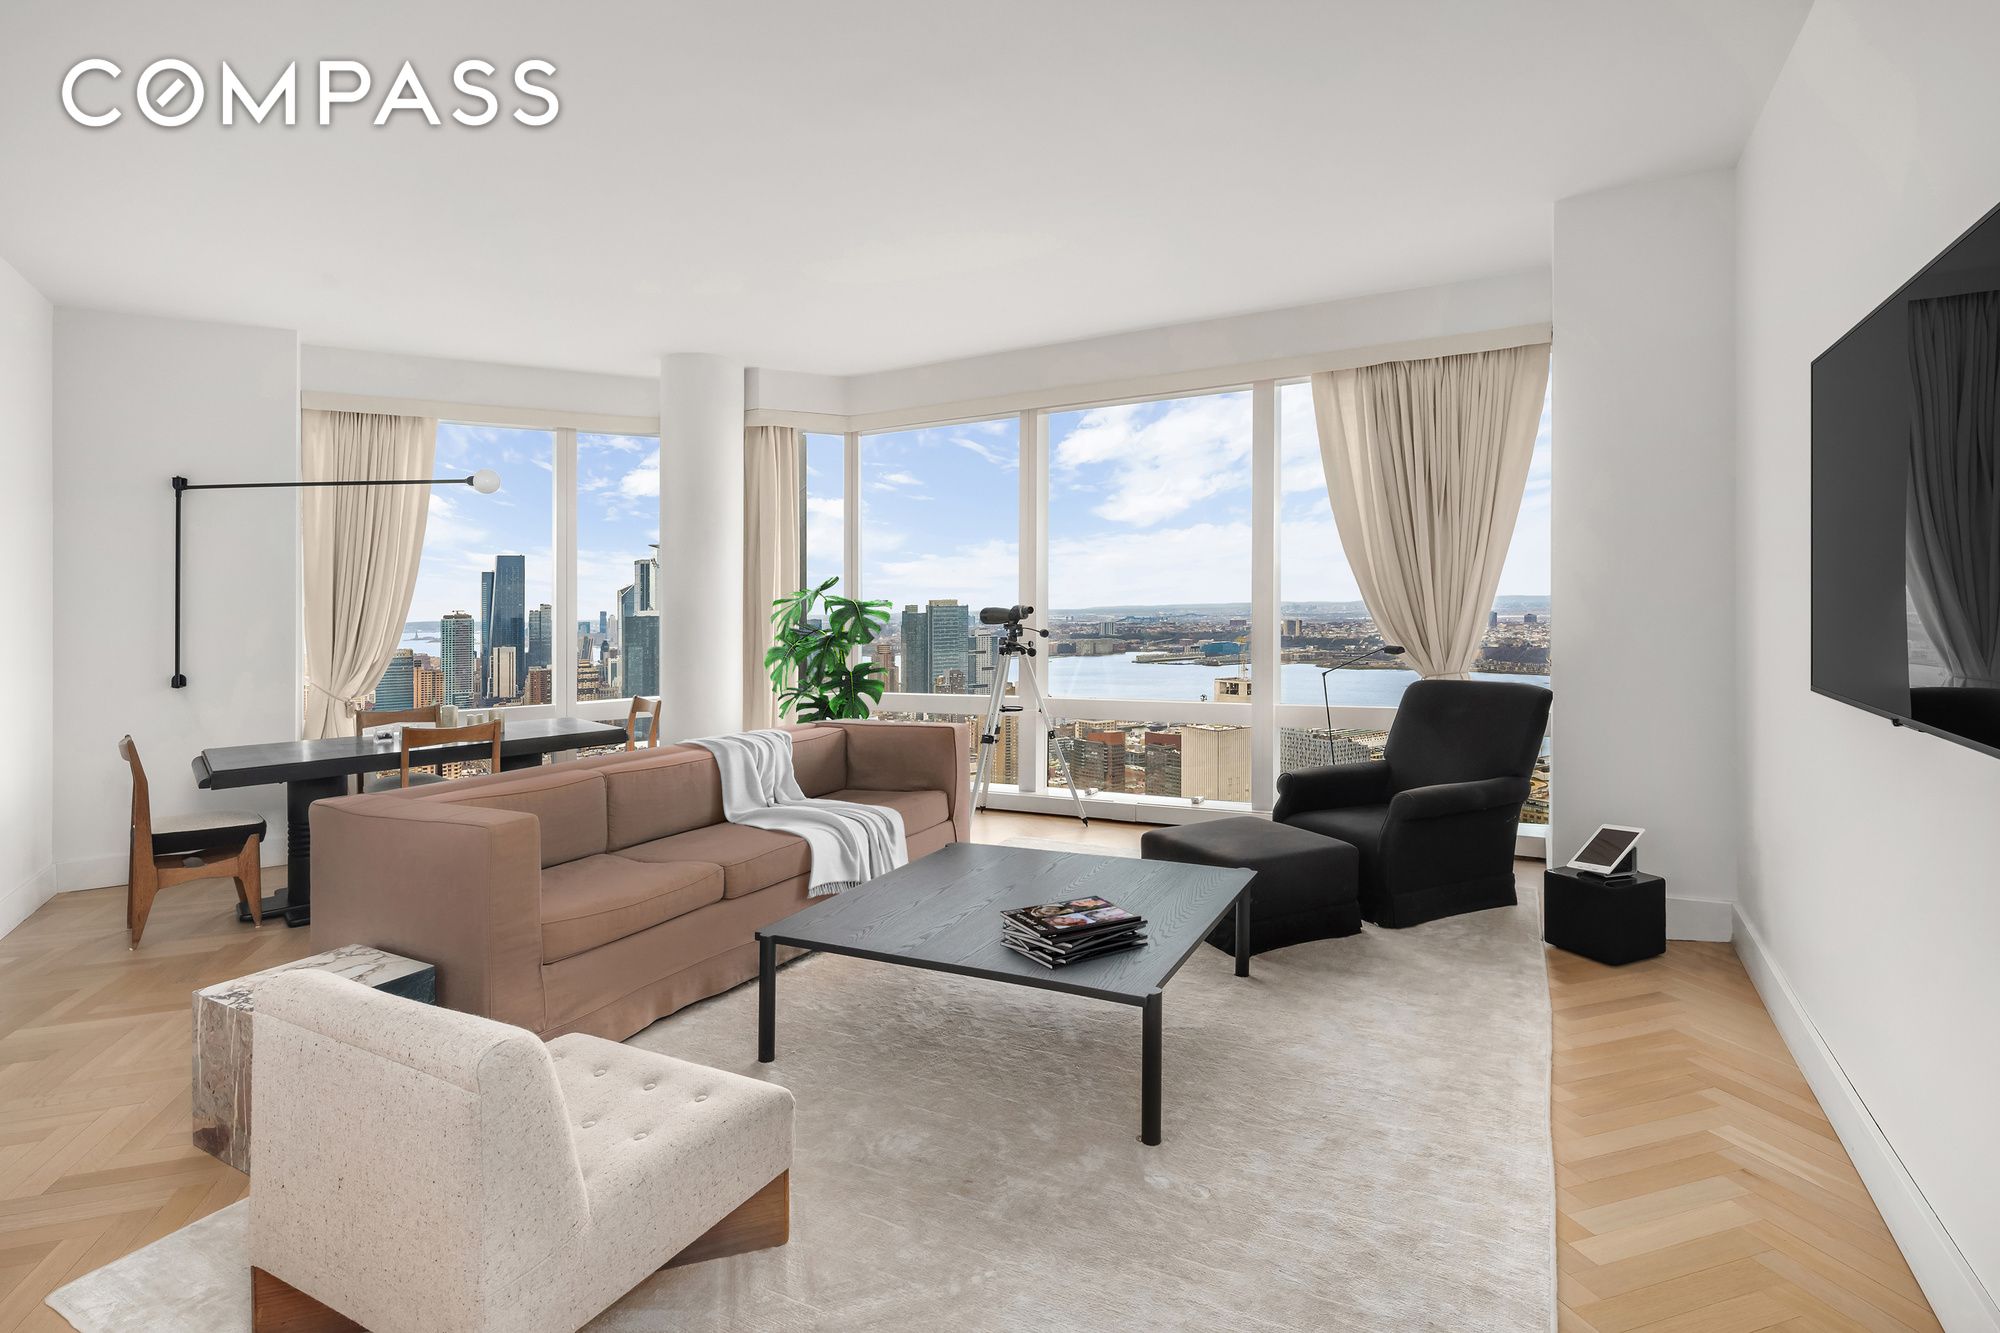 80 Columbus Circle 71E, Upper West Side, Upper West Side, NYC - 2 Bedrooms  
2.5 Bathrooms  
4 Rooms - 